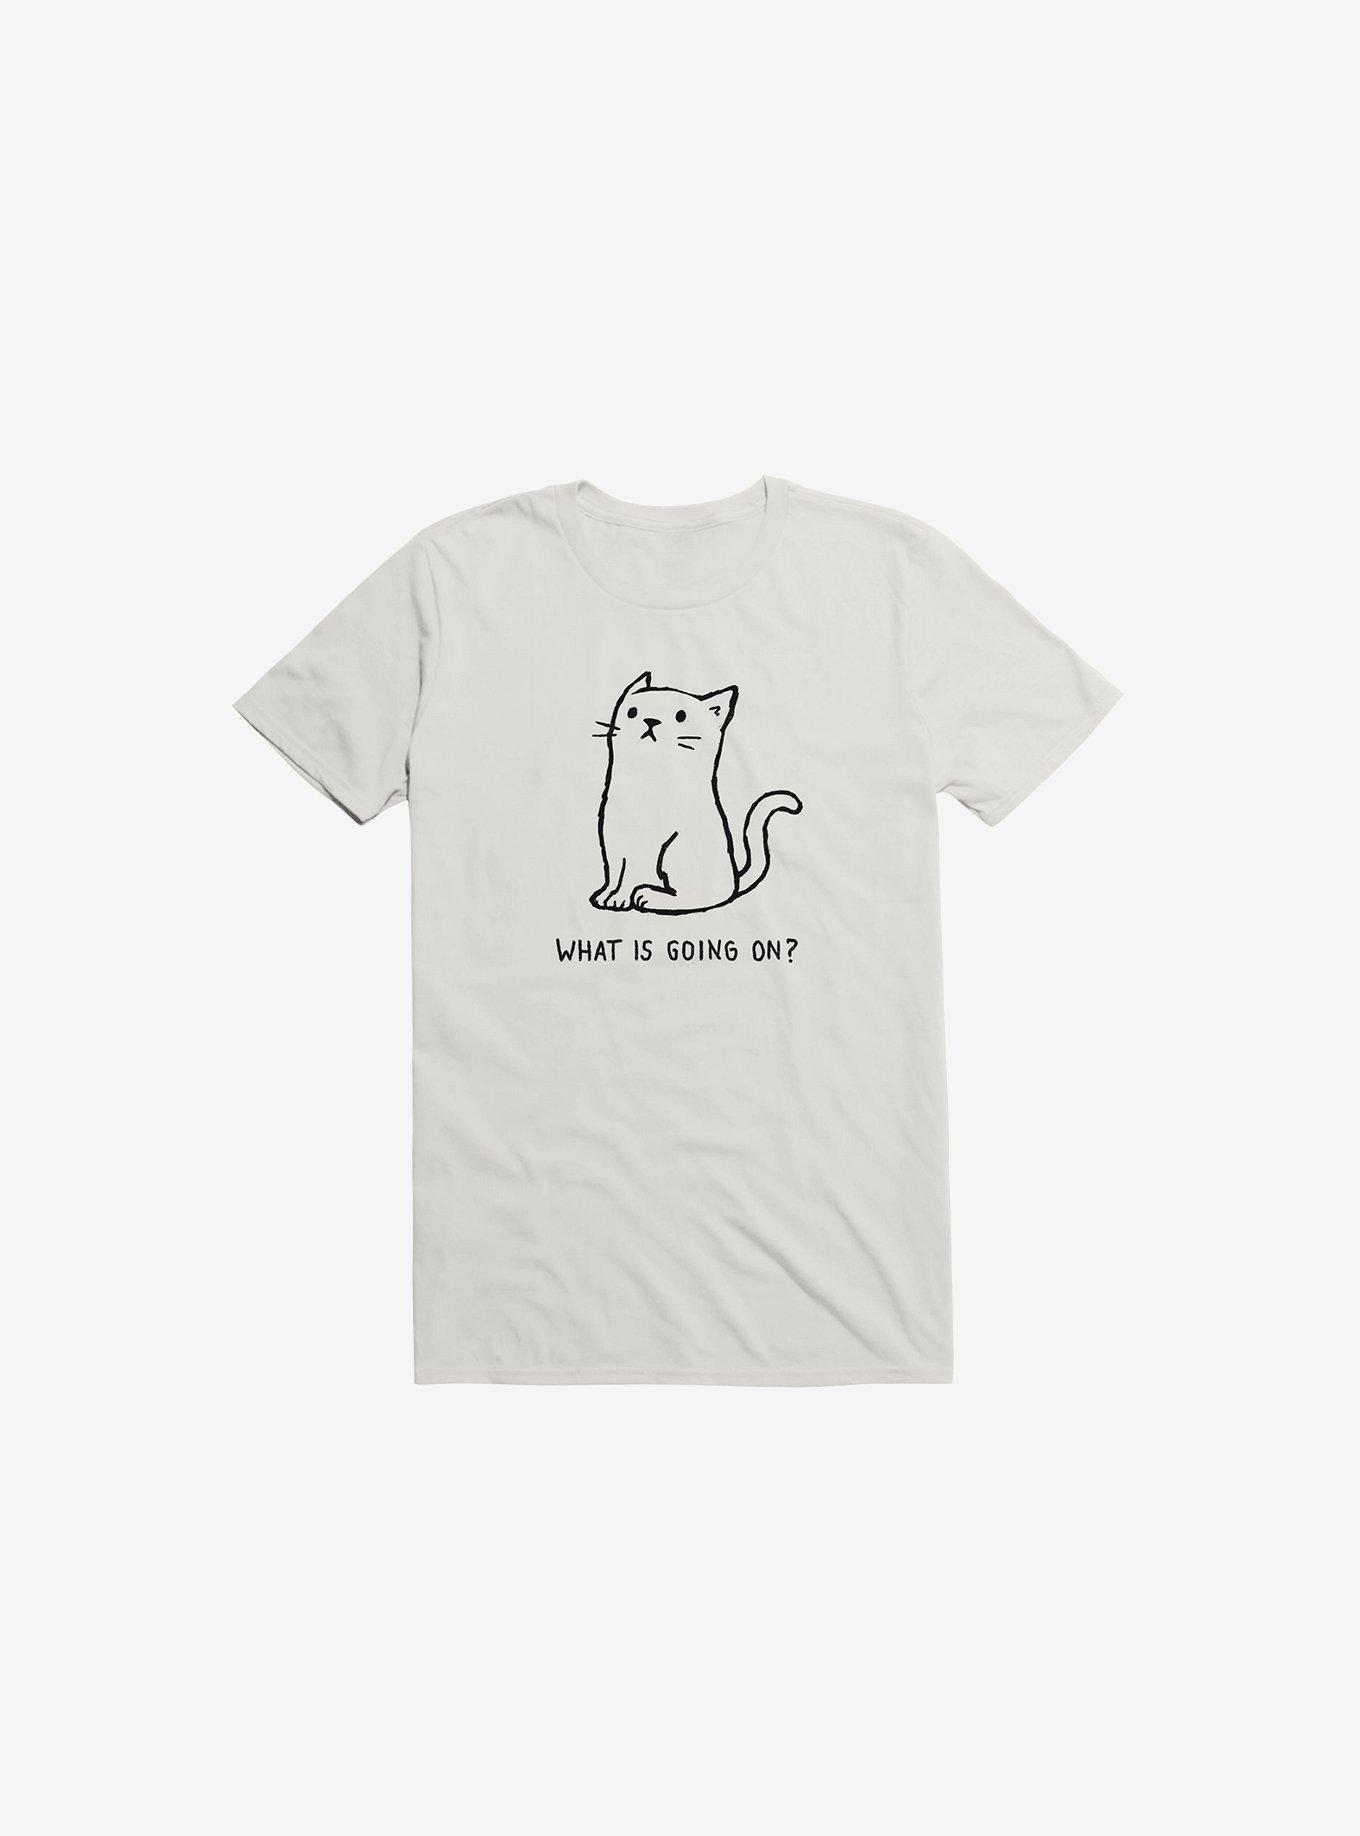 What Is Going On? T-Shirt, LIGHT BLUE, hi-res